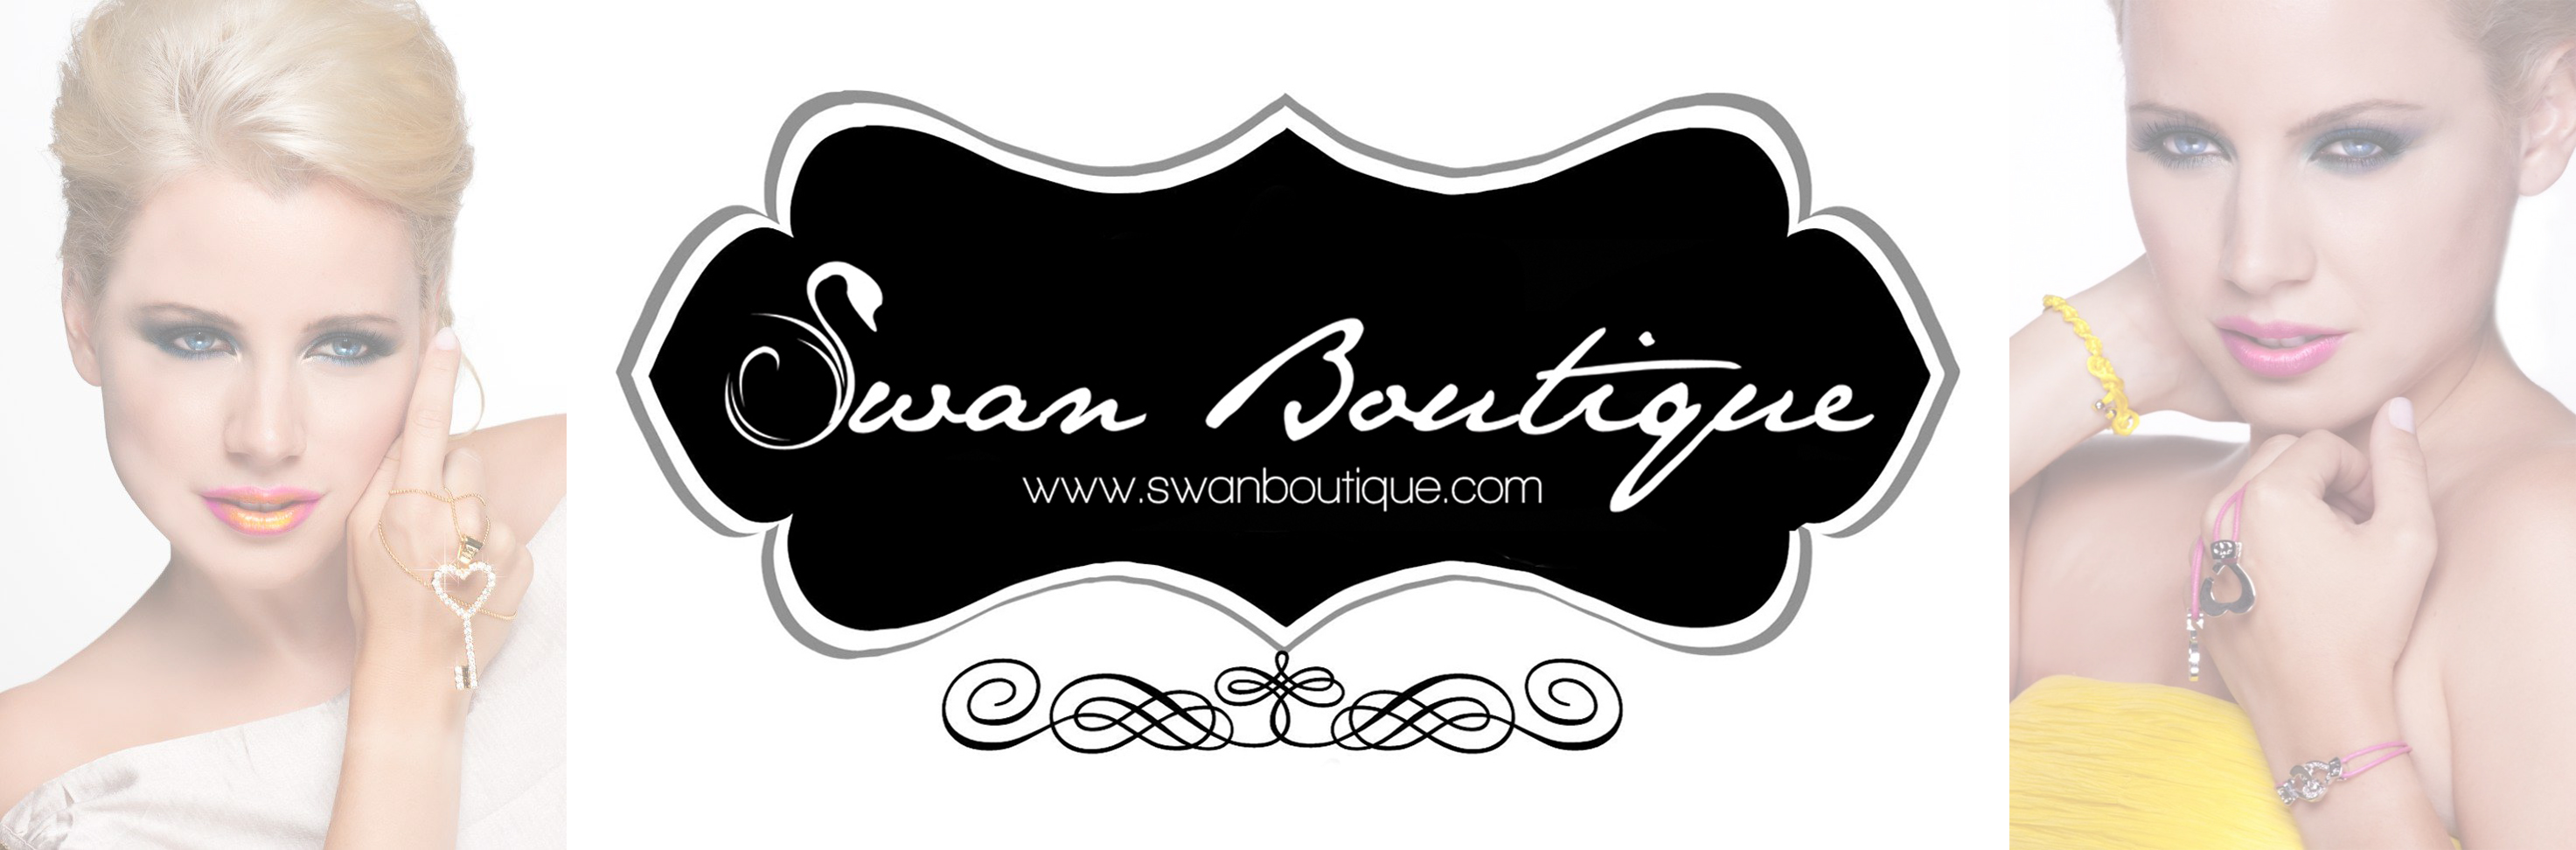 swan-boutique-cyber-poster-2016.jpg